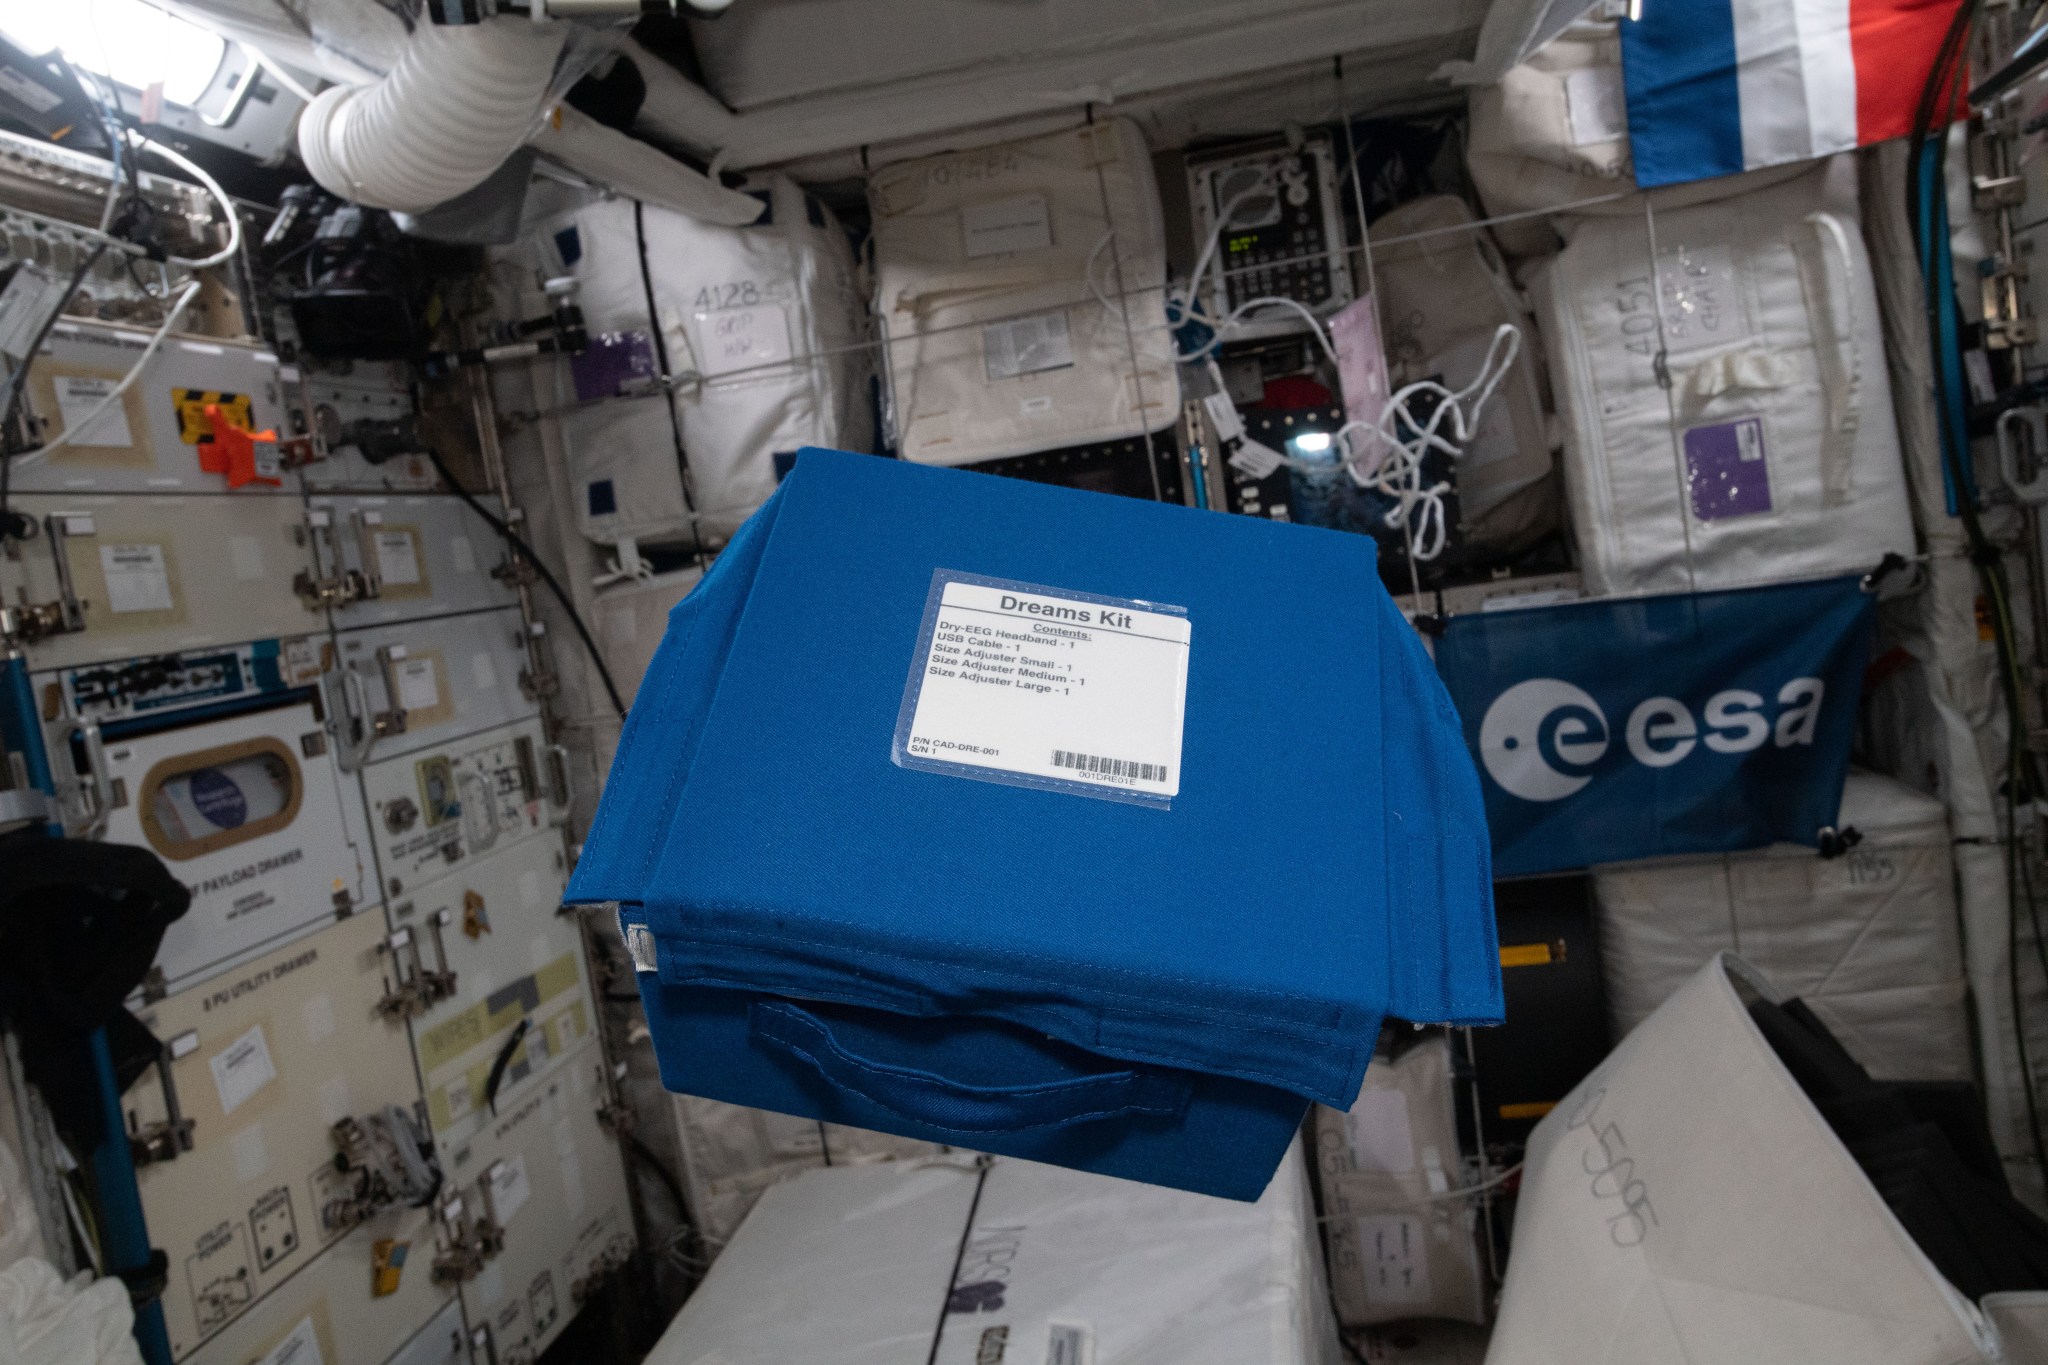 The hardware kit for Dreams, an ESA investigation that monitors the quality of astronaut sleep.